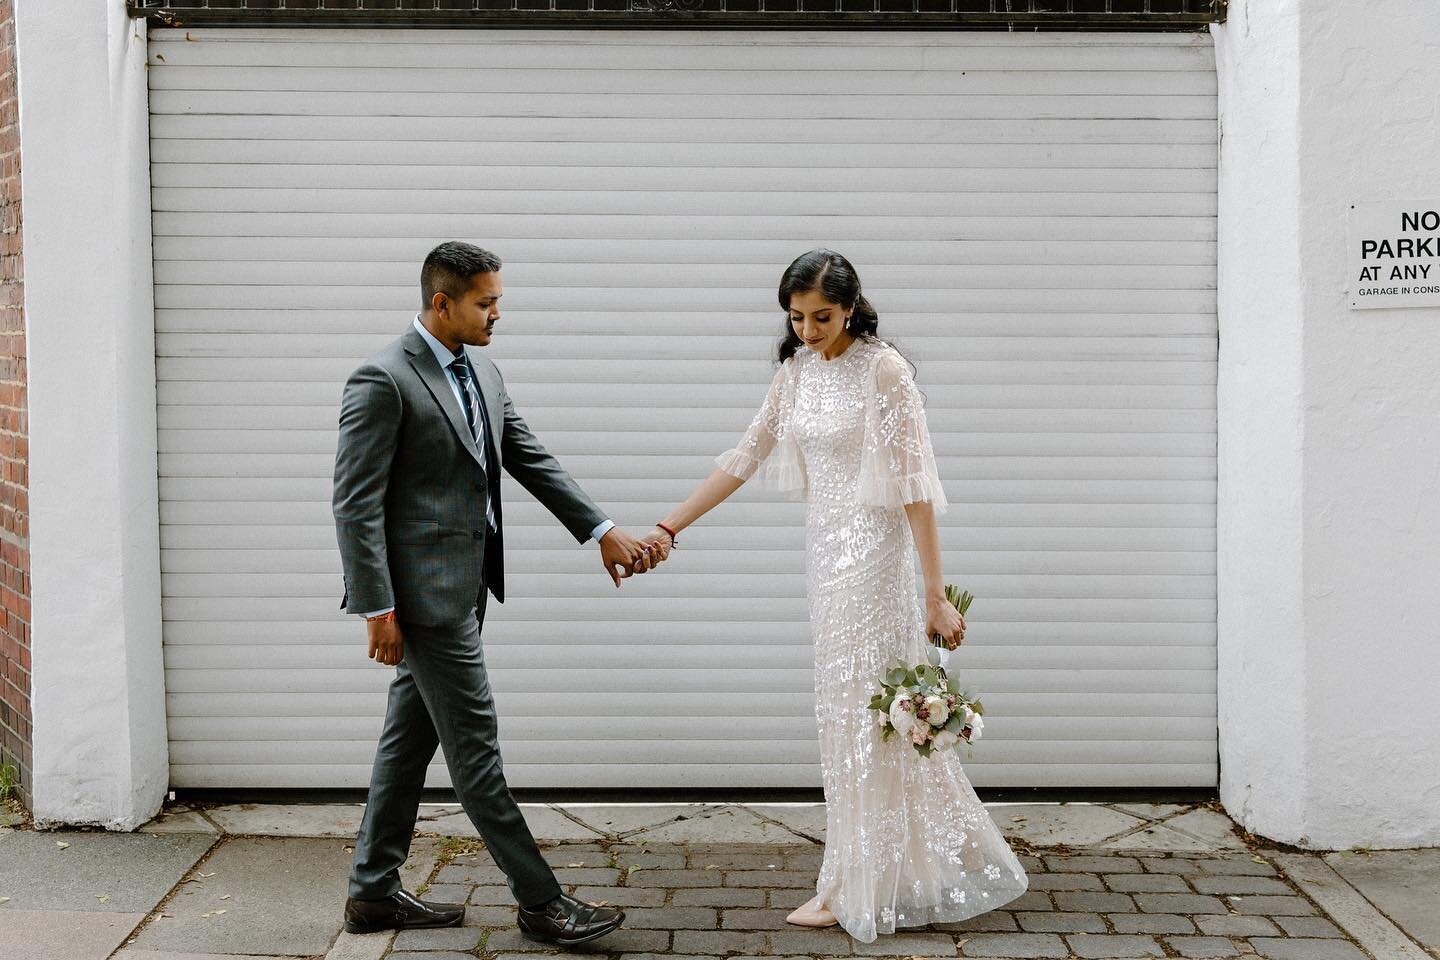 Tying the knot on a Tuesday in Islington // congrats Keval + Pria!! 🤩🖤
.
.
.
.
.
#islingtontownhall #islingtonwedding #londonwedding #townhallweddinglondon #islingtontownhallwedding #sayidoislington #smallweddinglondon #midweekweddinglondon #isling